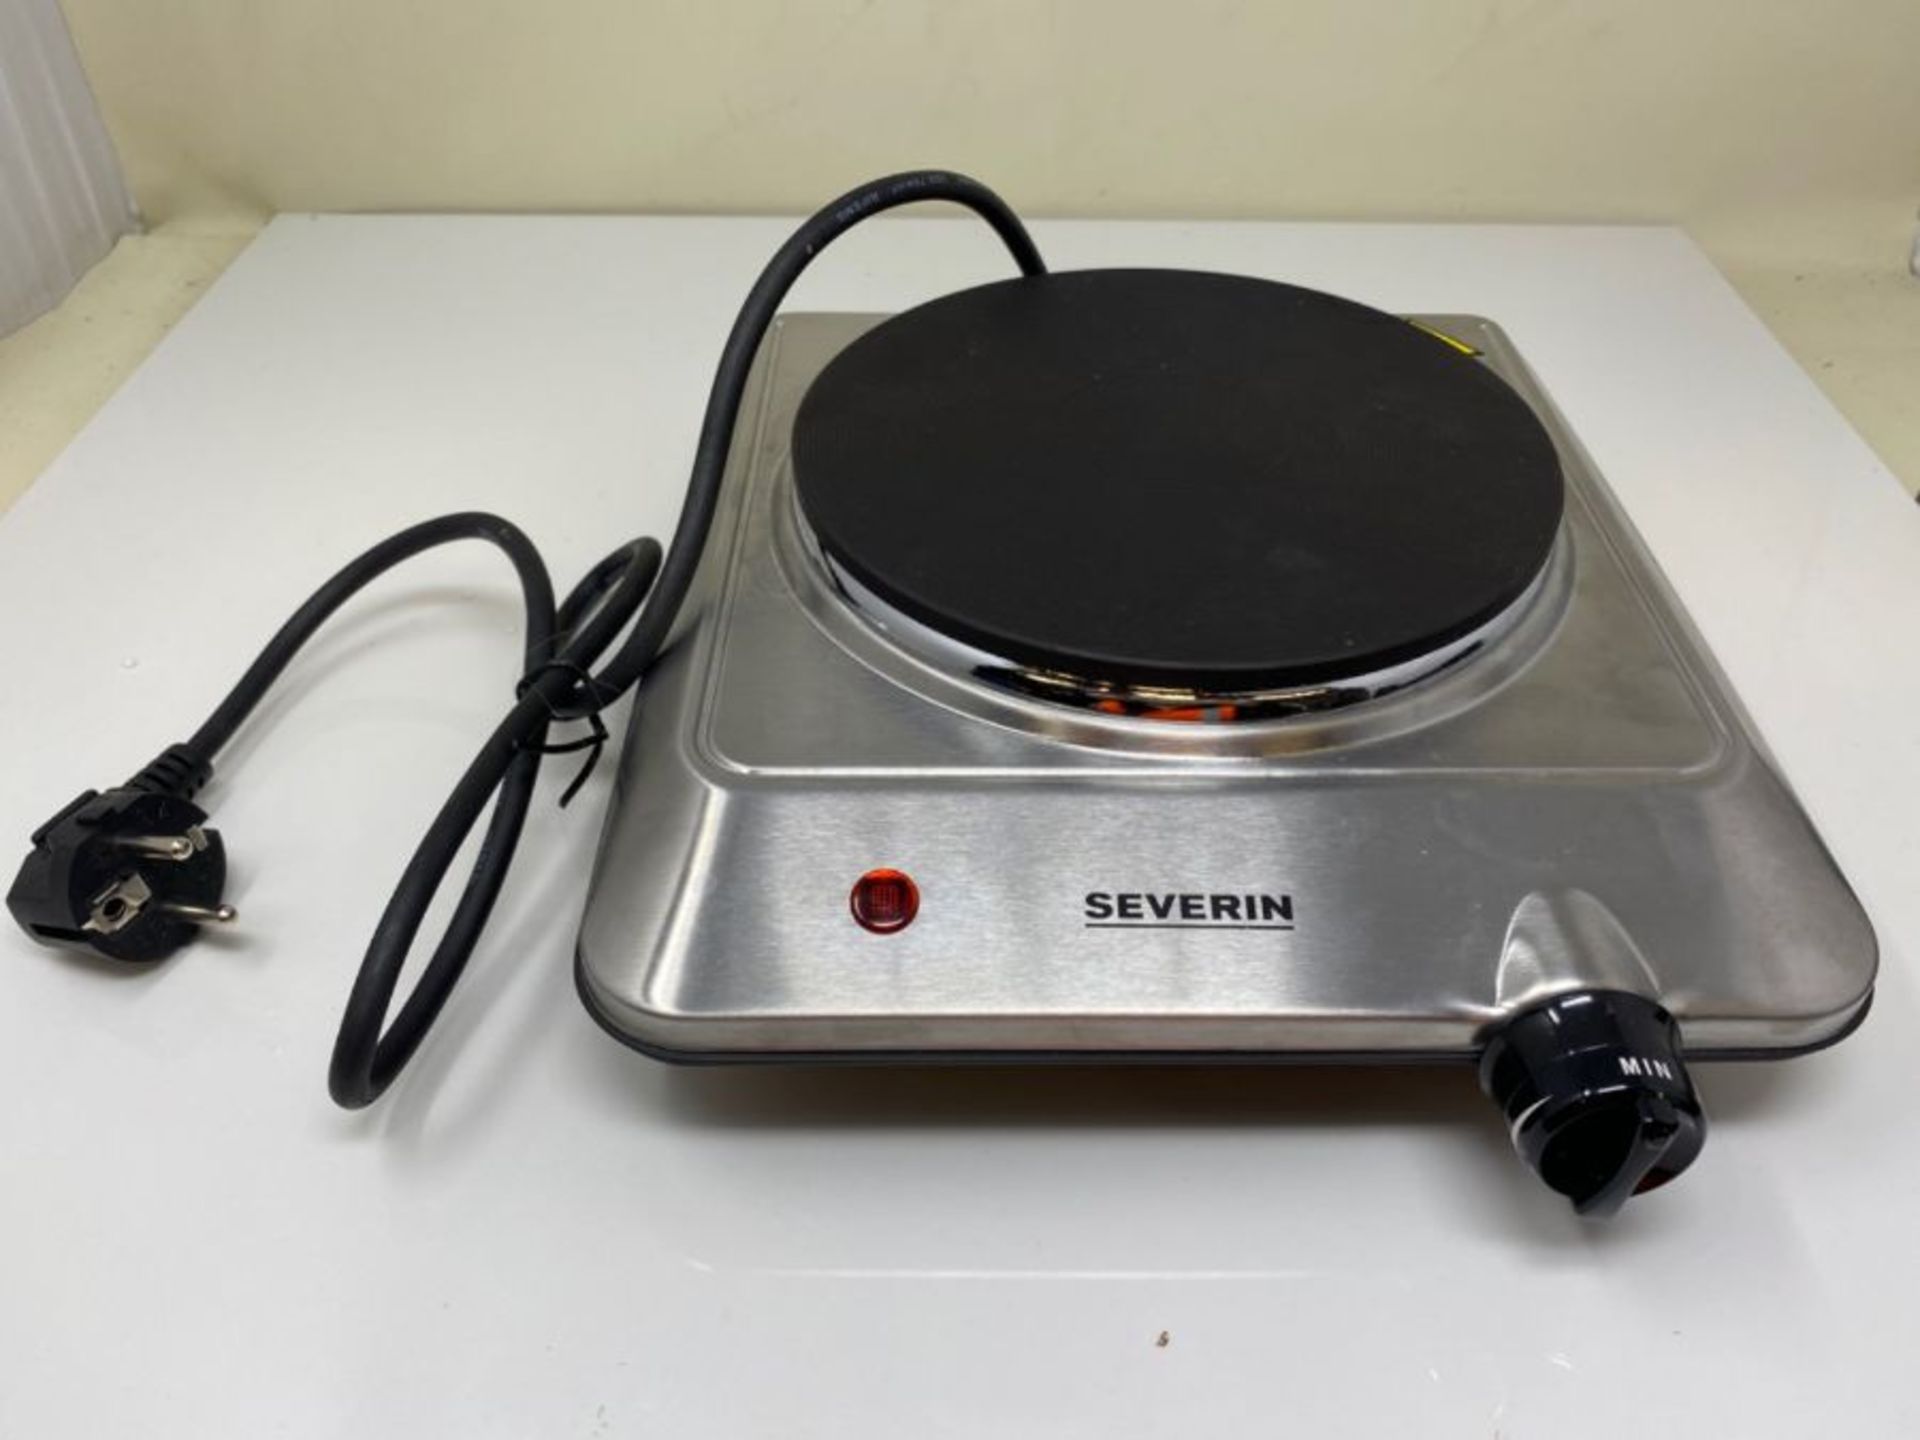 Severin Table Stove with 1500 W of Power KP 1092, Stainless Steel - Image 3 of 3